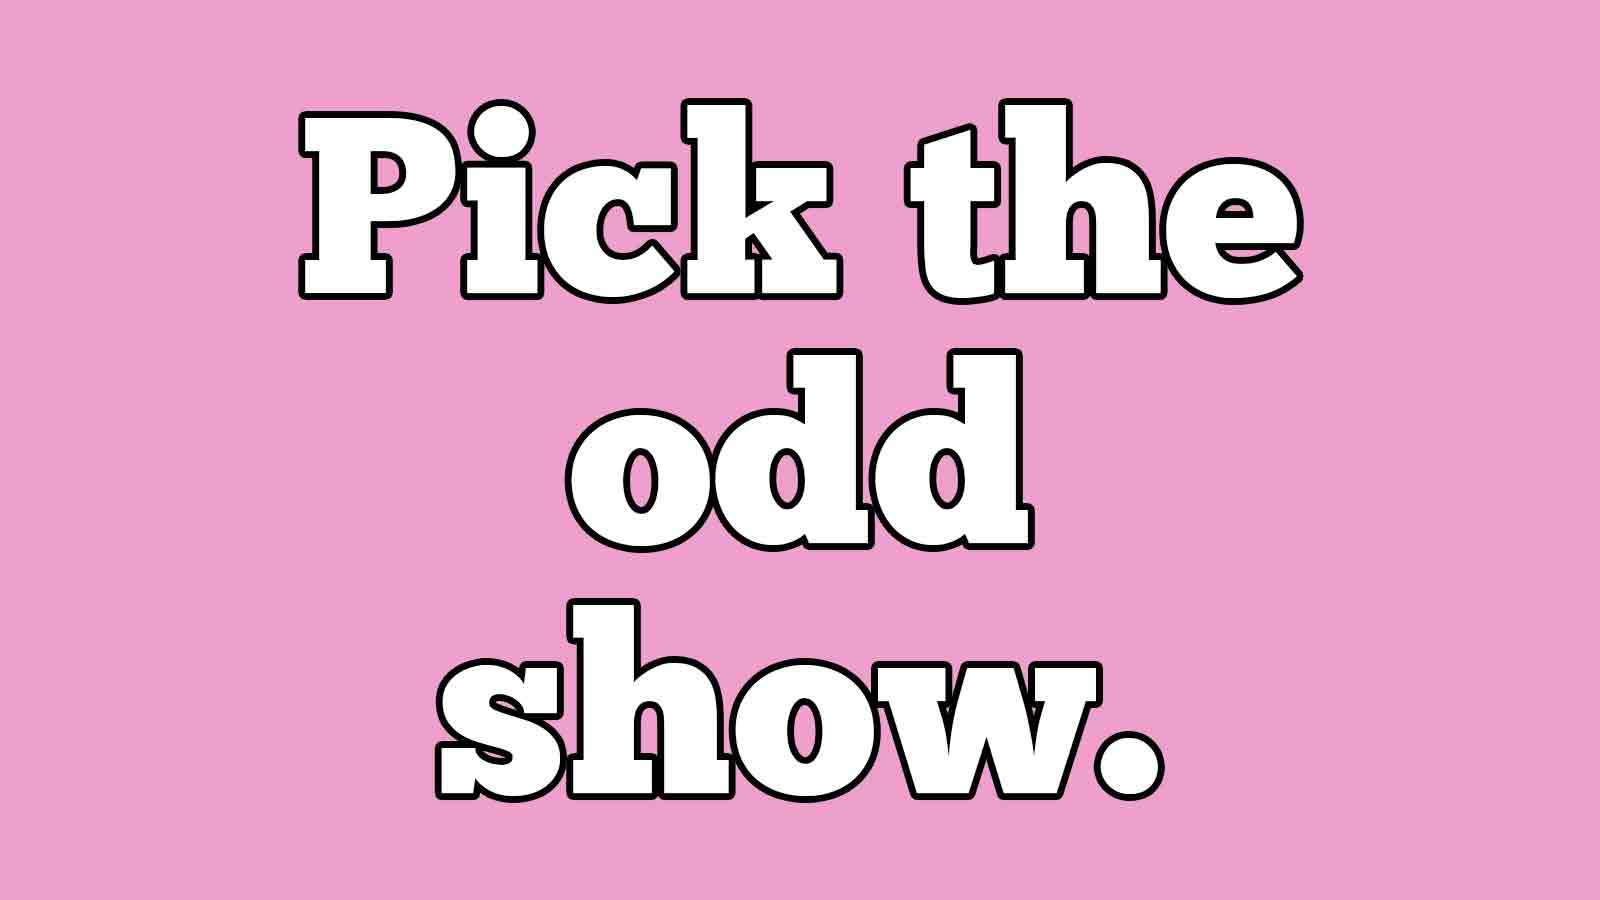 Can You Score 15/15 in This Mildly Infuriating “Odd One Out” Quiz? 1138